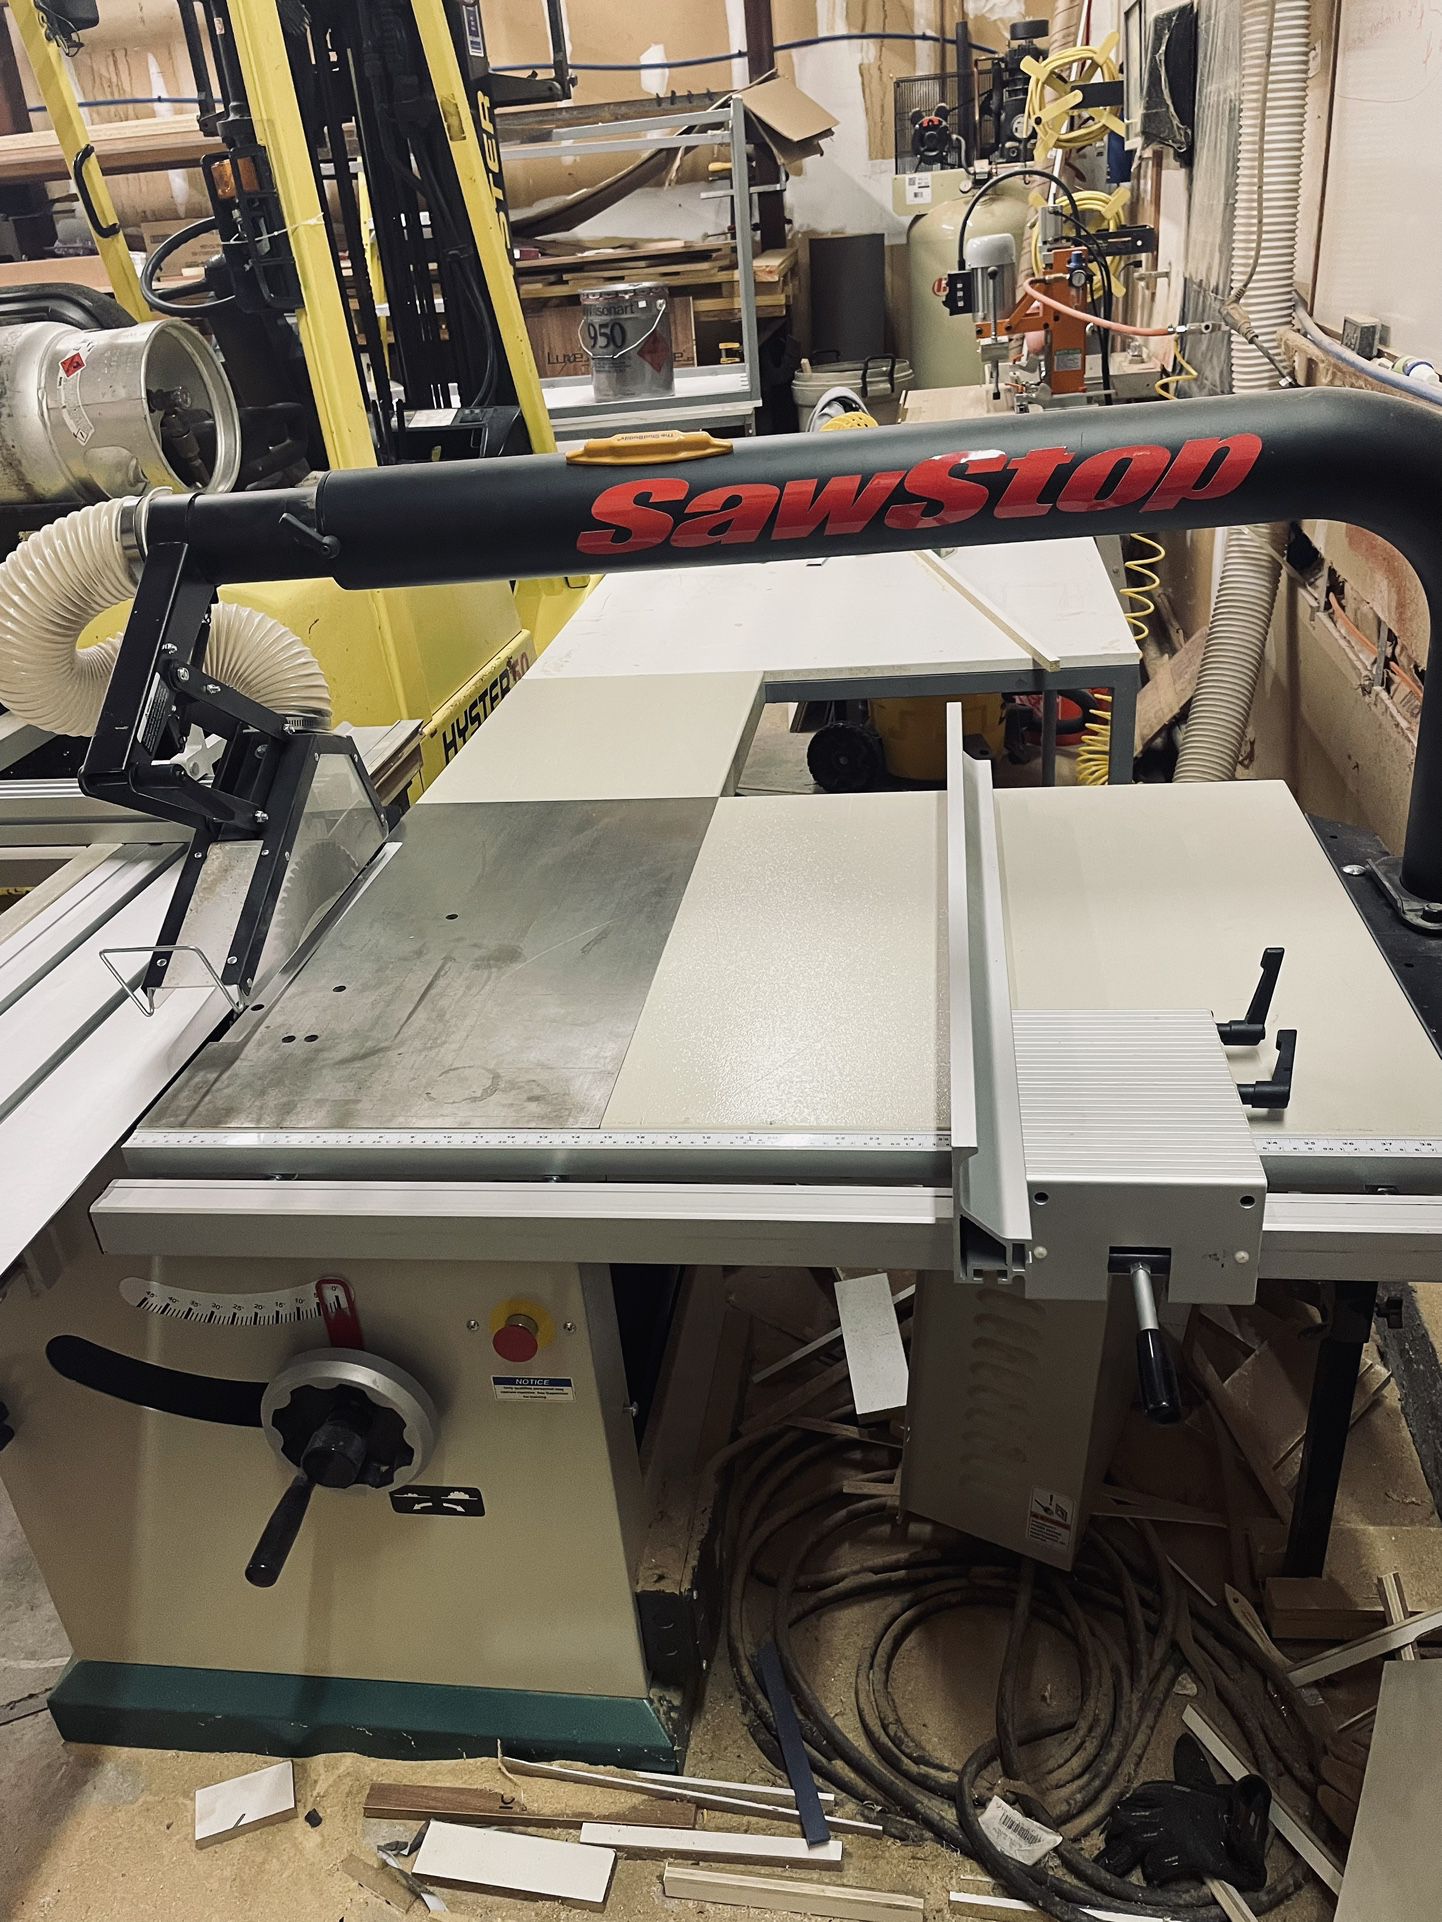 Grizzly Sliding Table Saw 